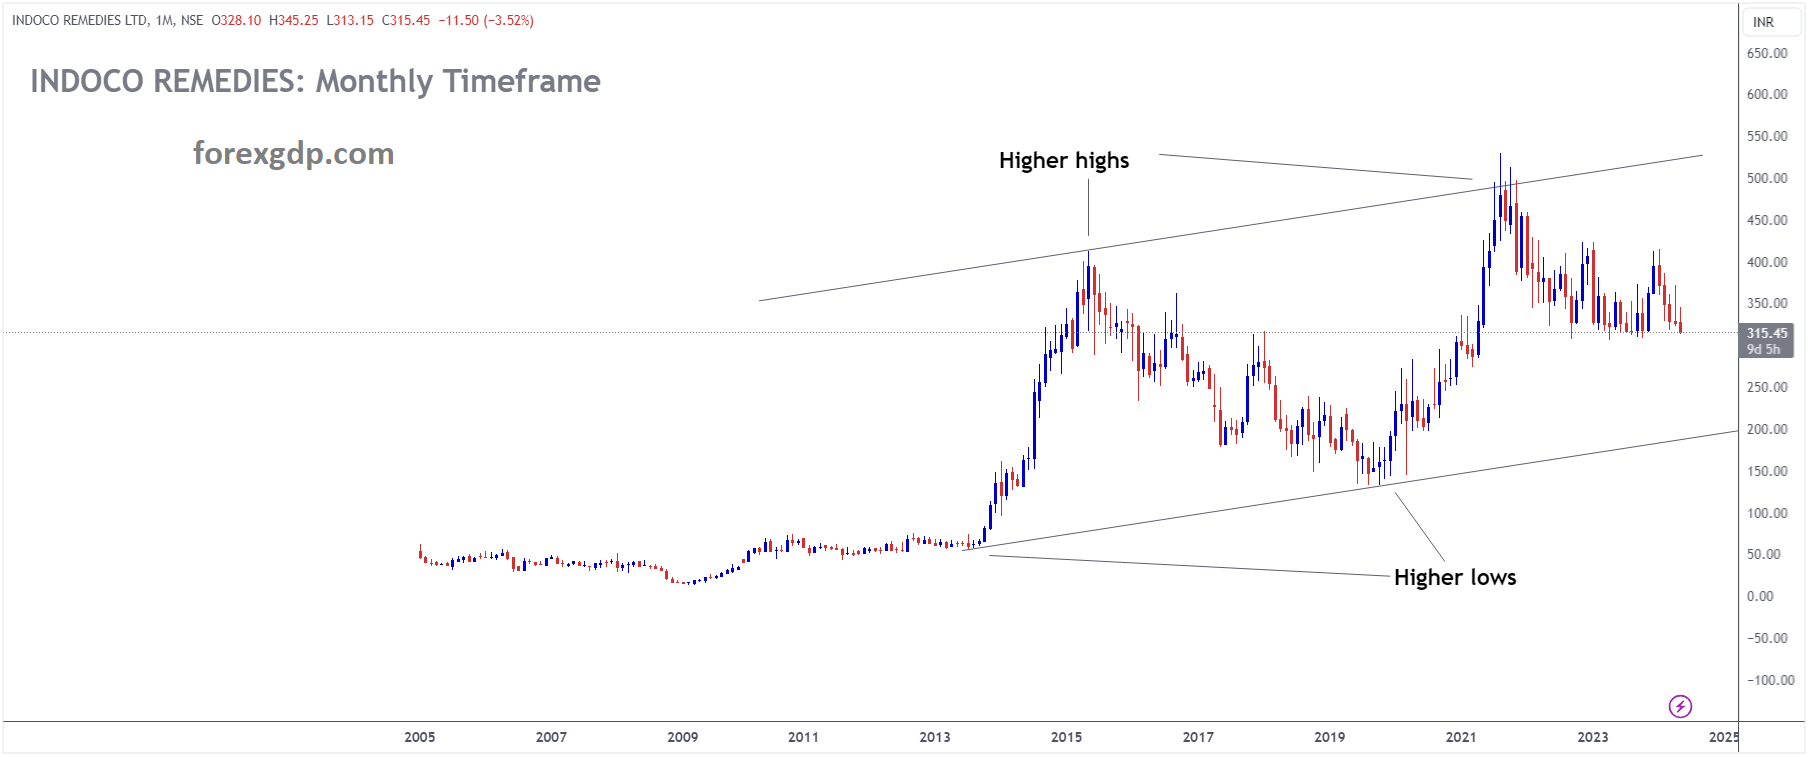 INDOCO REMEDIES Market price is moving in Ascending channel and market has fallen from the higher high area of the channel